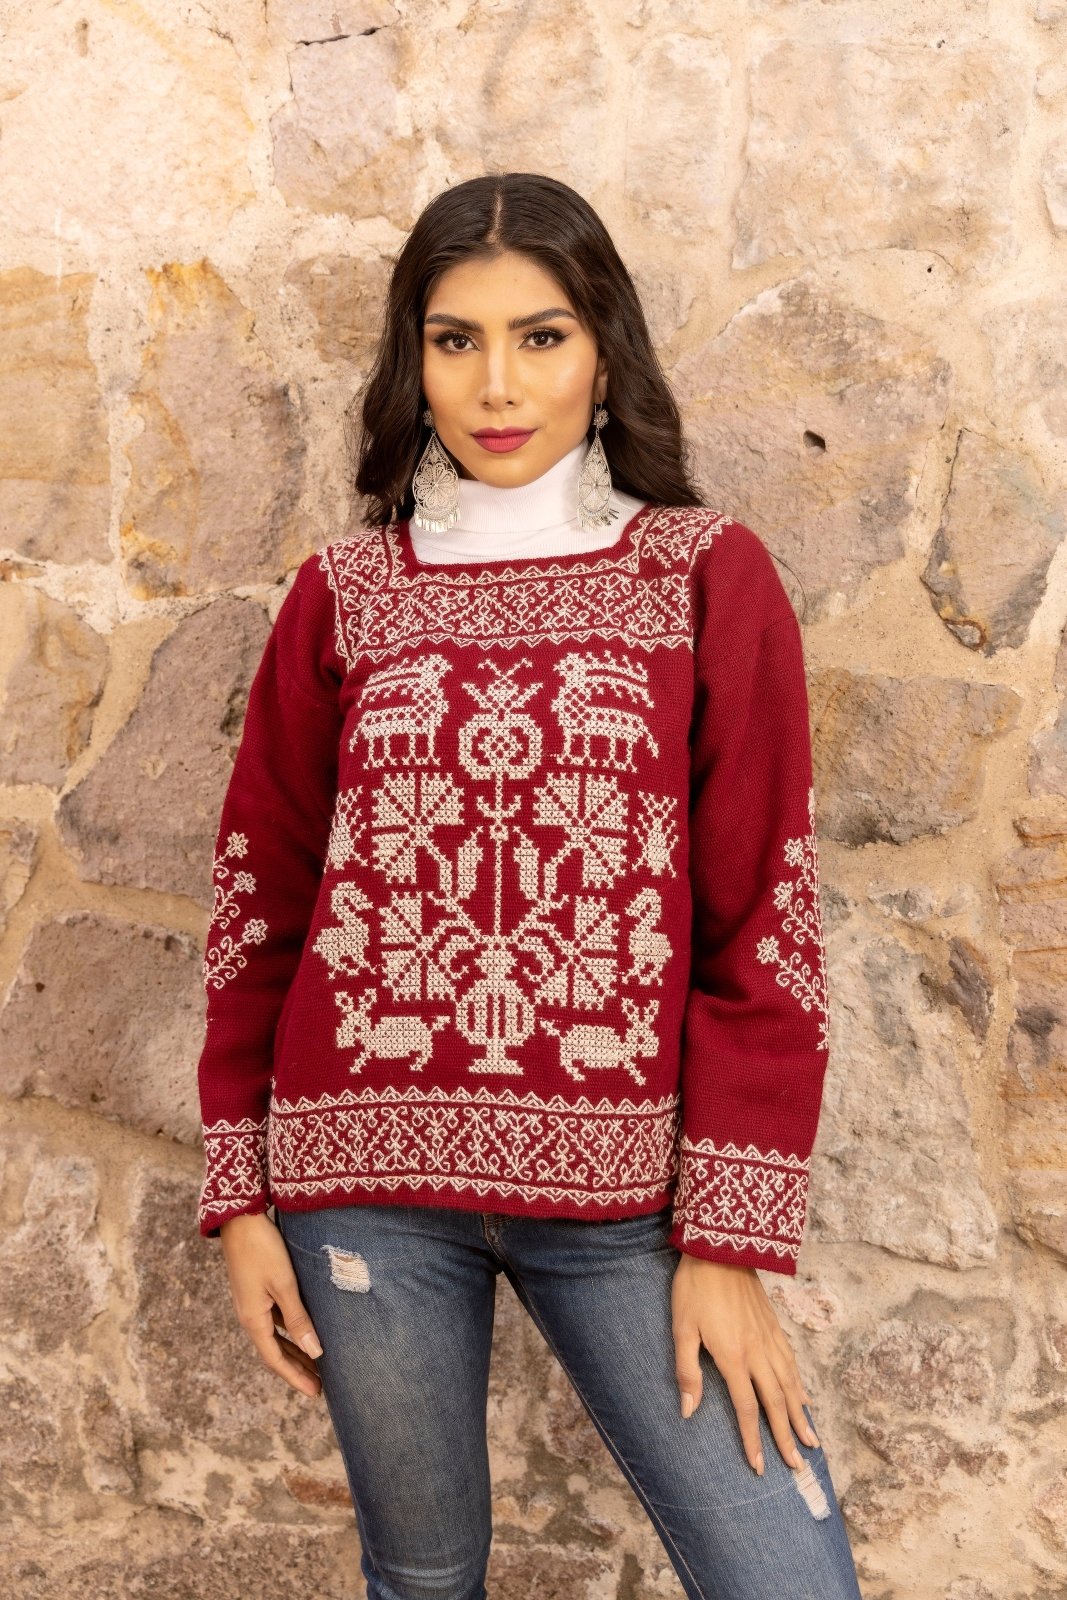 Ethnic Mexican Sweater. Wine Color Sweater, Beige Design.